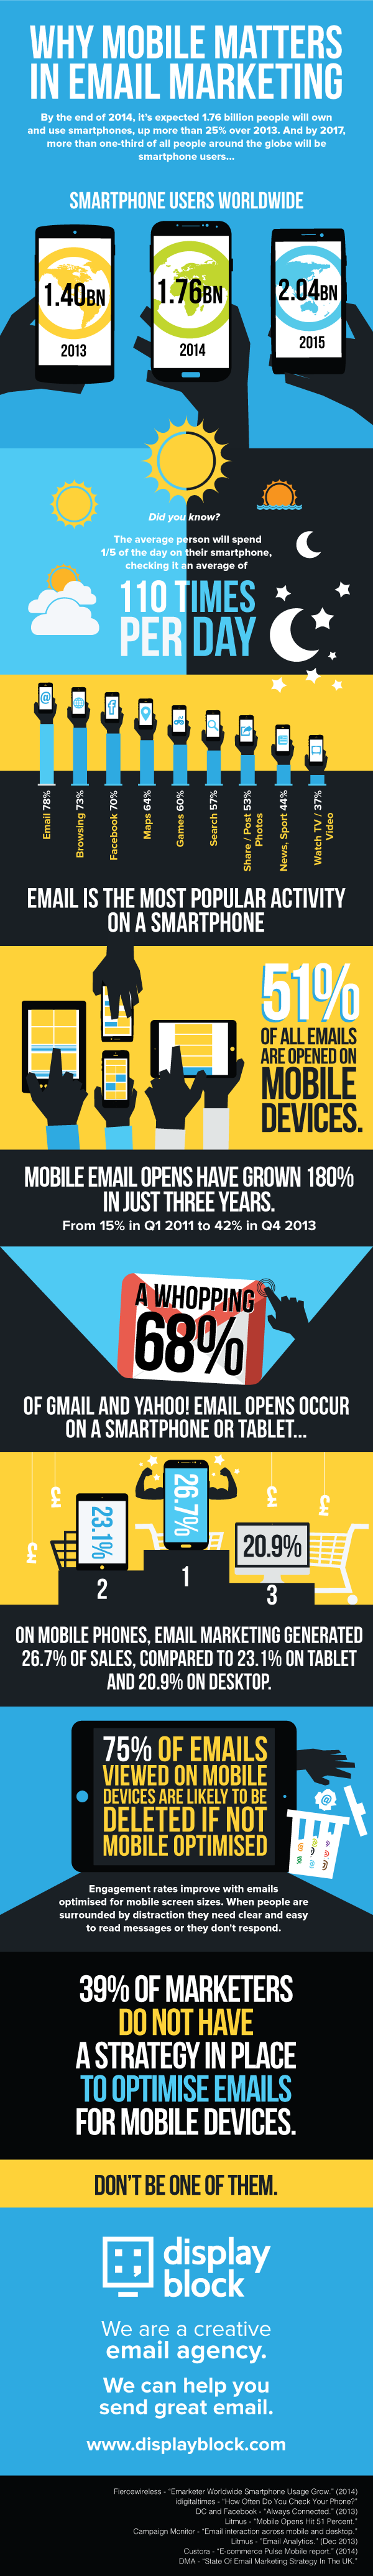 why mobile matters in email marketing